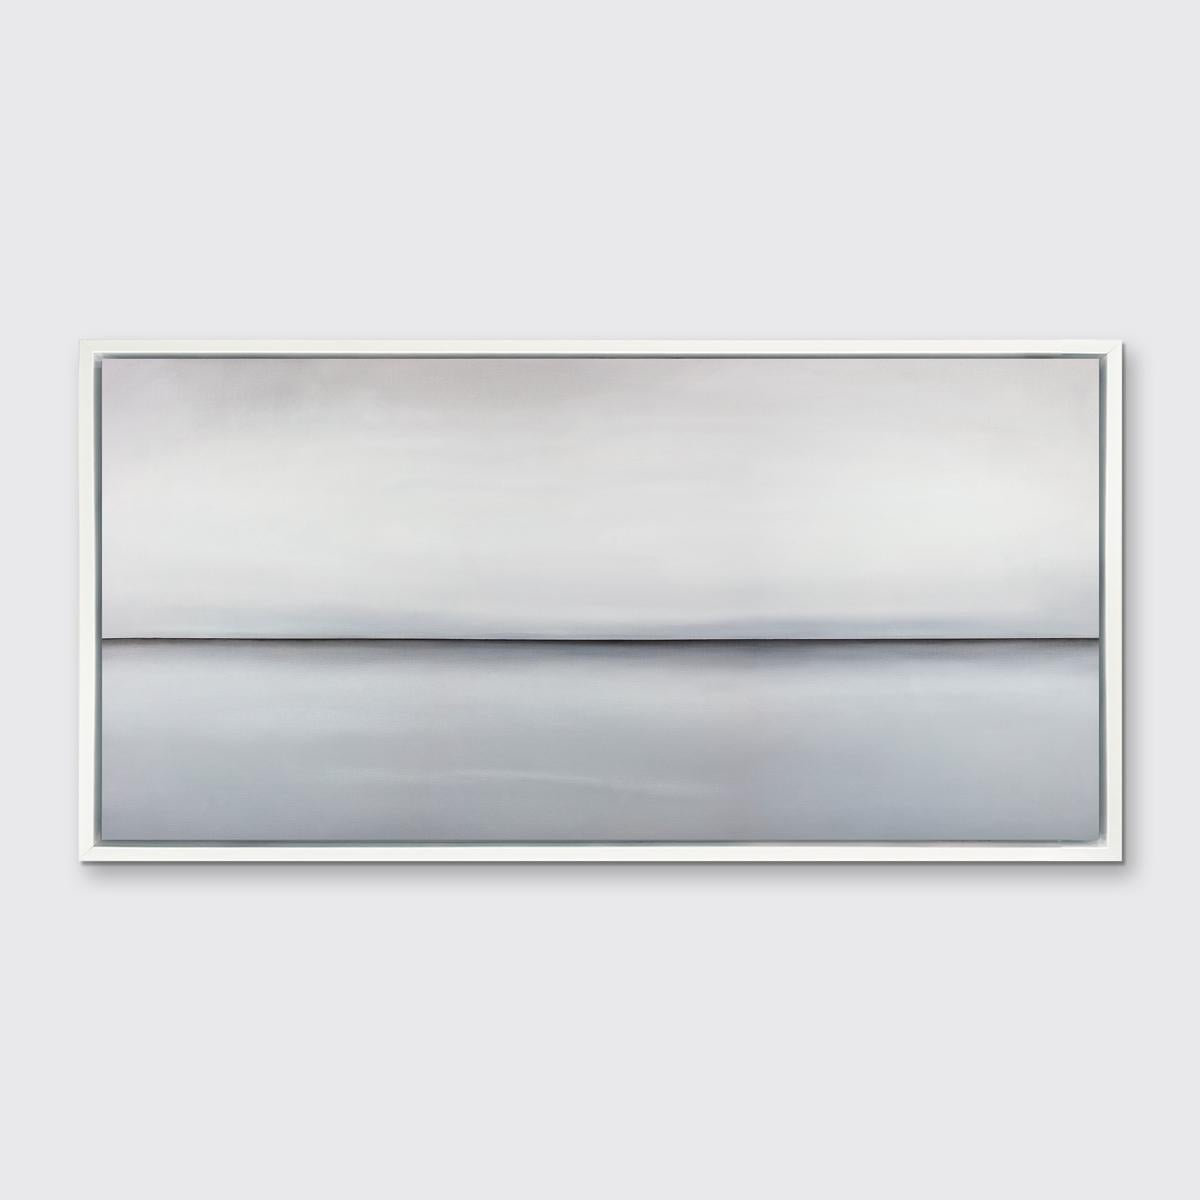 Tony Iadicicco Abstract Print - "Clear View" Framed Limited Edition Giclee Print, 24" x 48"